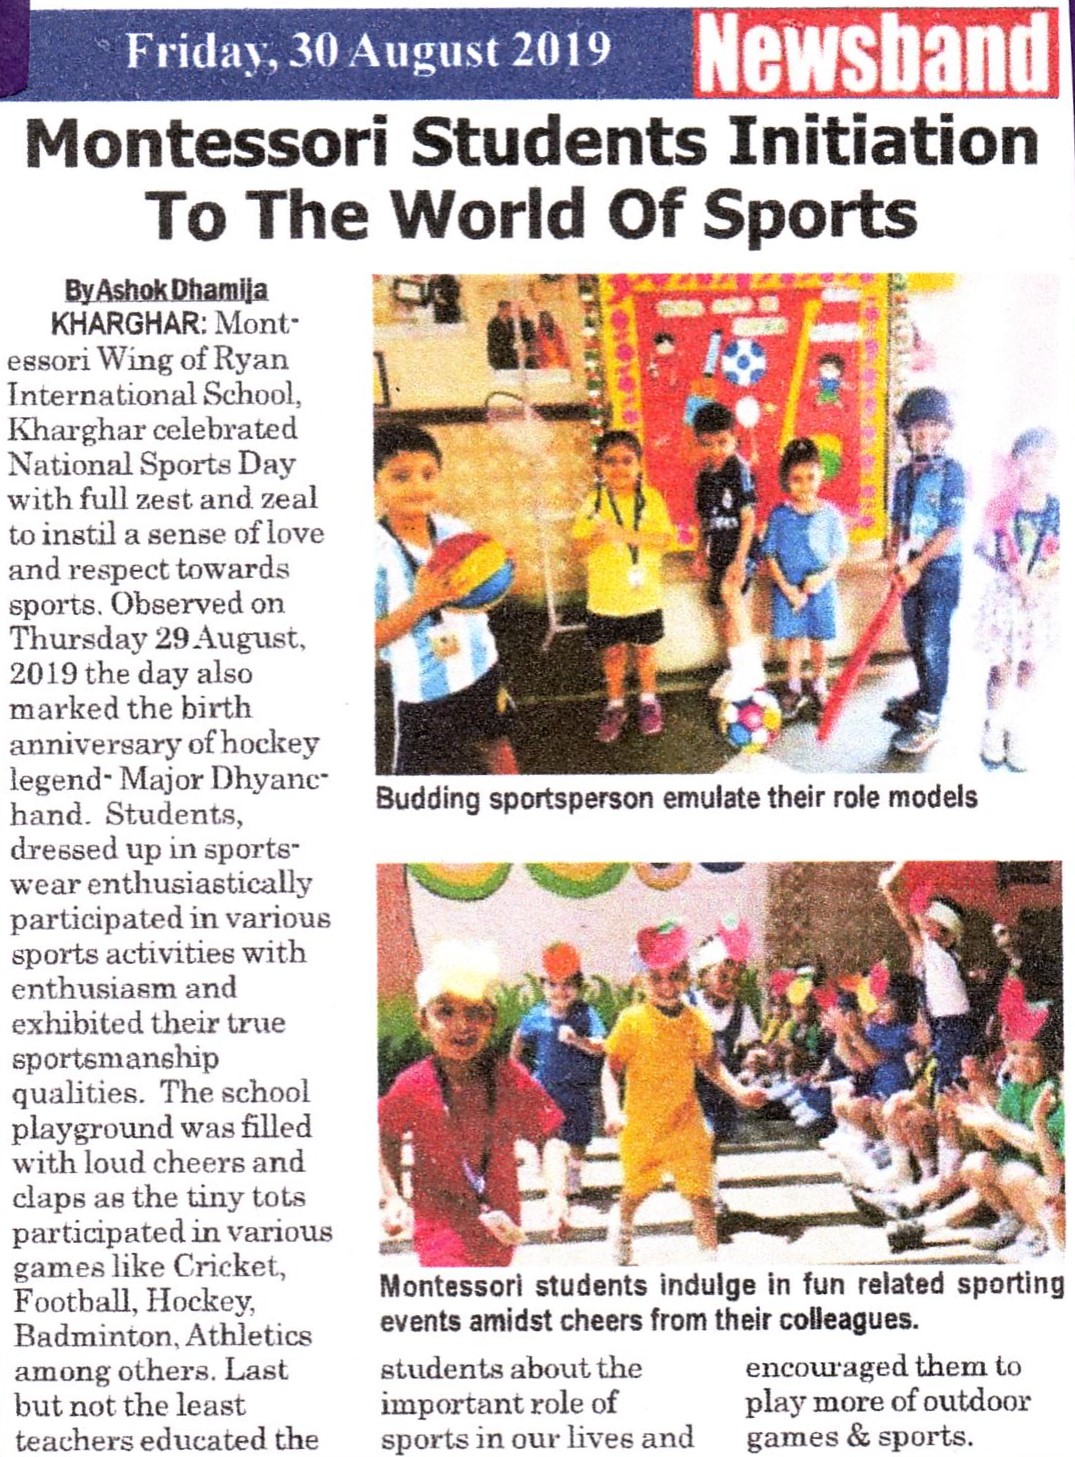 Montessori Student’s initiation to the world of  Sports was mentioned in News band - Ryan International School, Kharghar